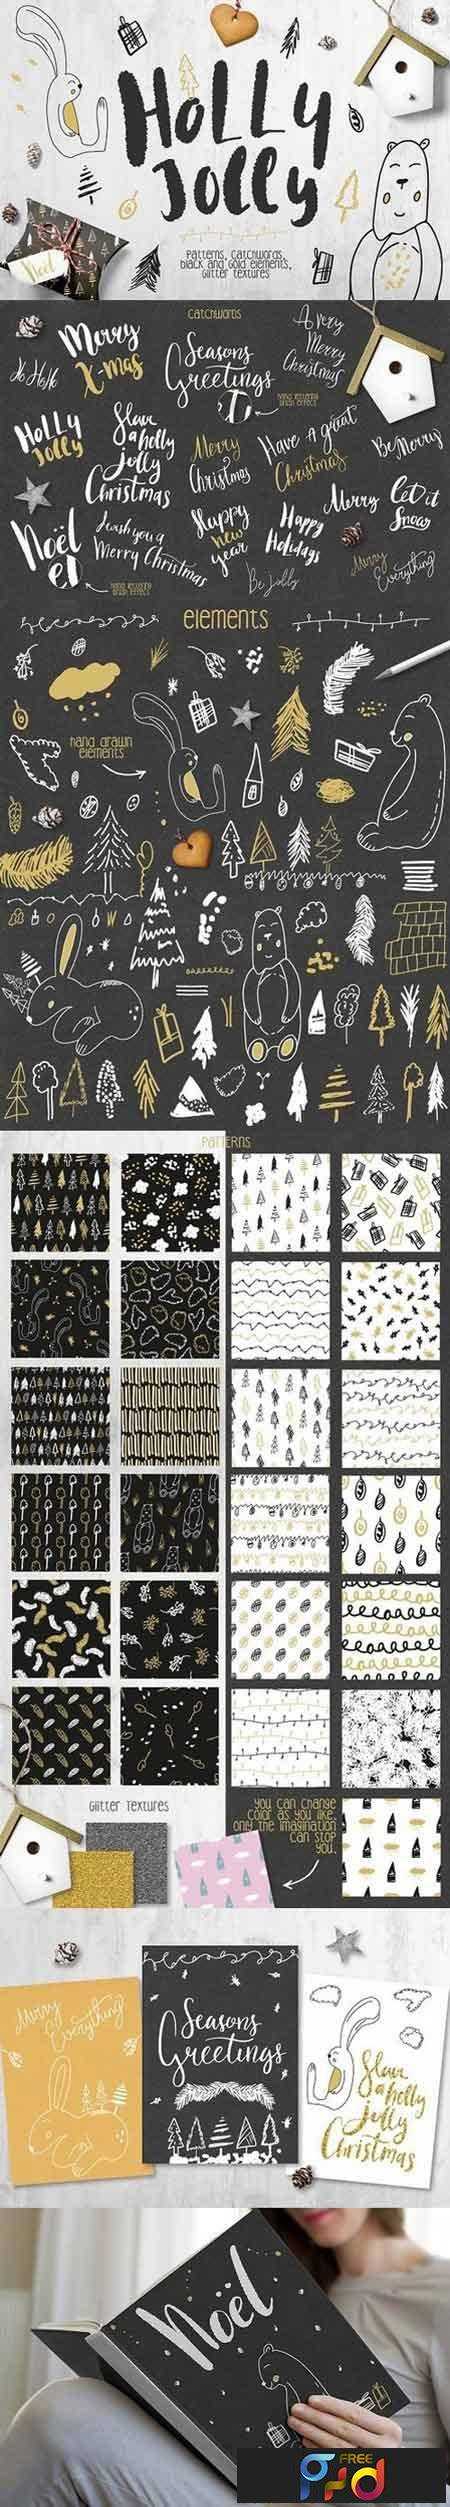 FreePsdVn.com_VECTOR_1701095_holly_jolly_collection_patterns